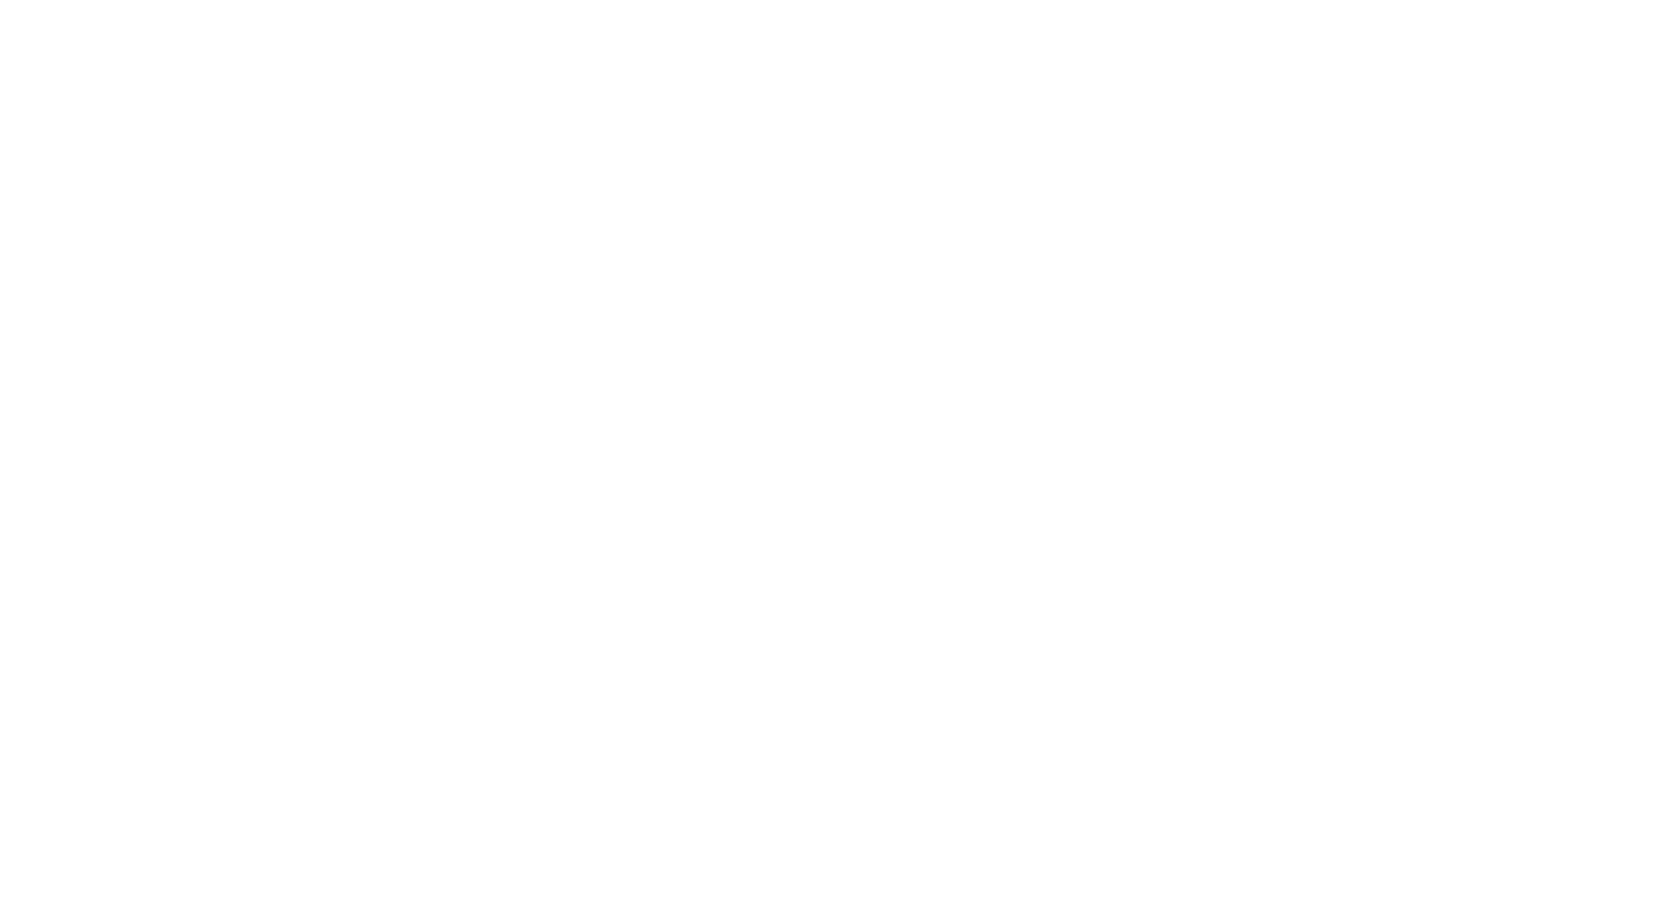 Wall Candy Wallpaper – The Home of Wallpaper in Australia